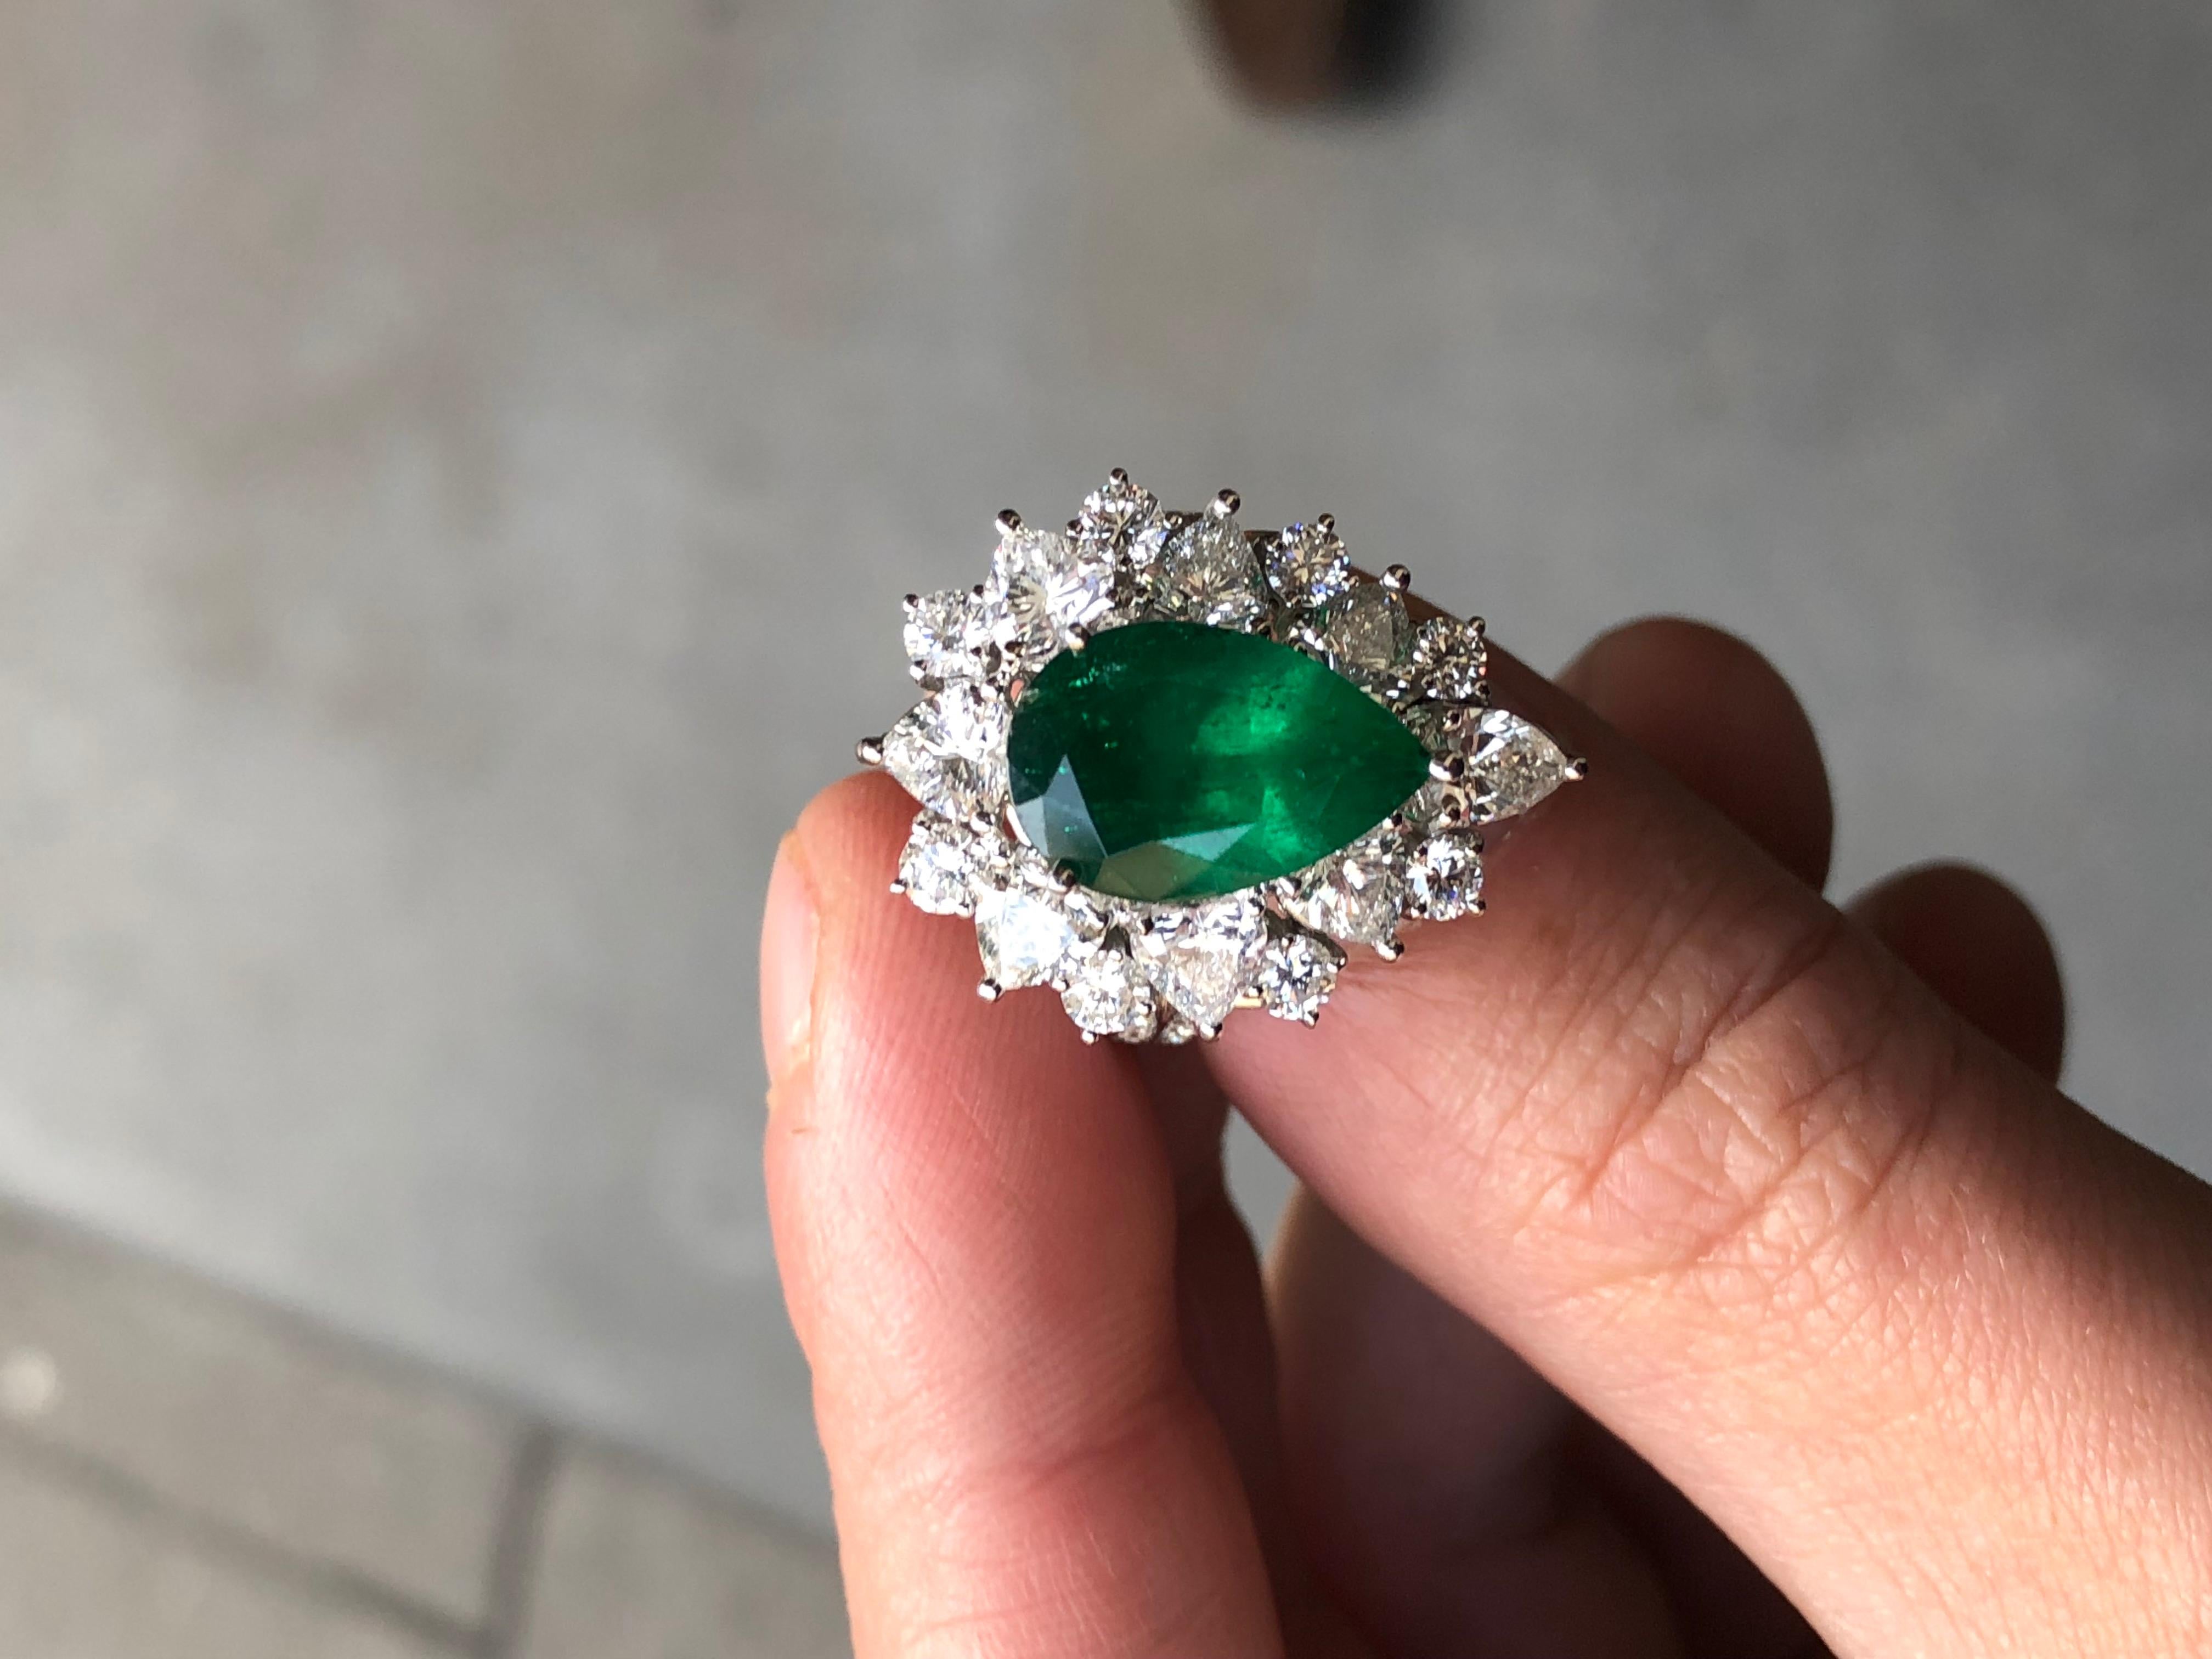 Women's 3.95 Carat Pear Cut Colombian Emerald Ring with Detachable Diamond Adorned Shank For Sale